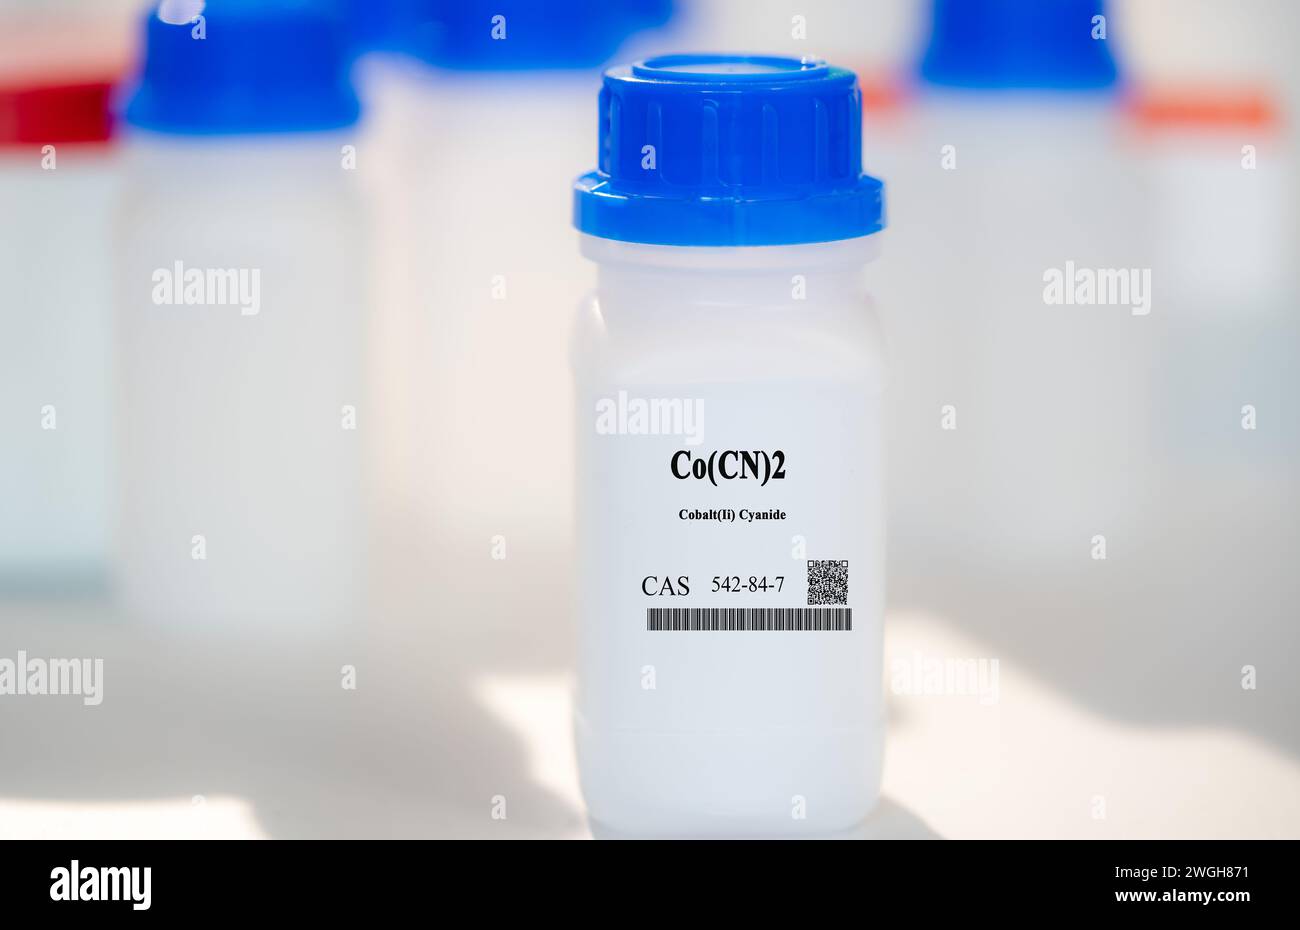 Co(CN)2 cobalt(II) cyanide CAS 542-84-7 chemical substance in white plastic laboratory packaging Stock Photo